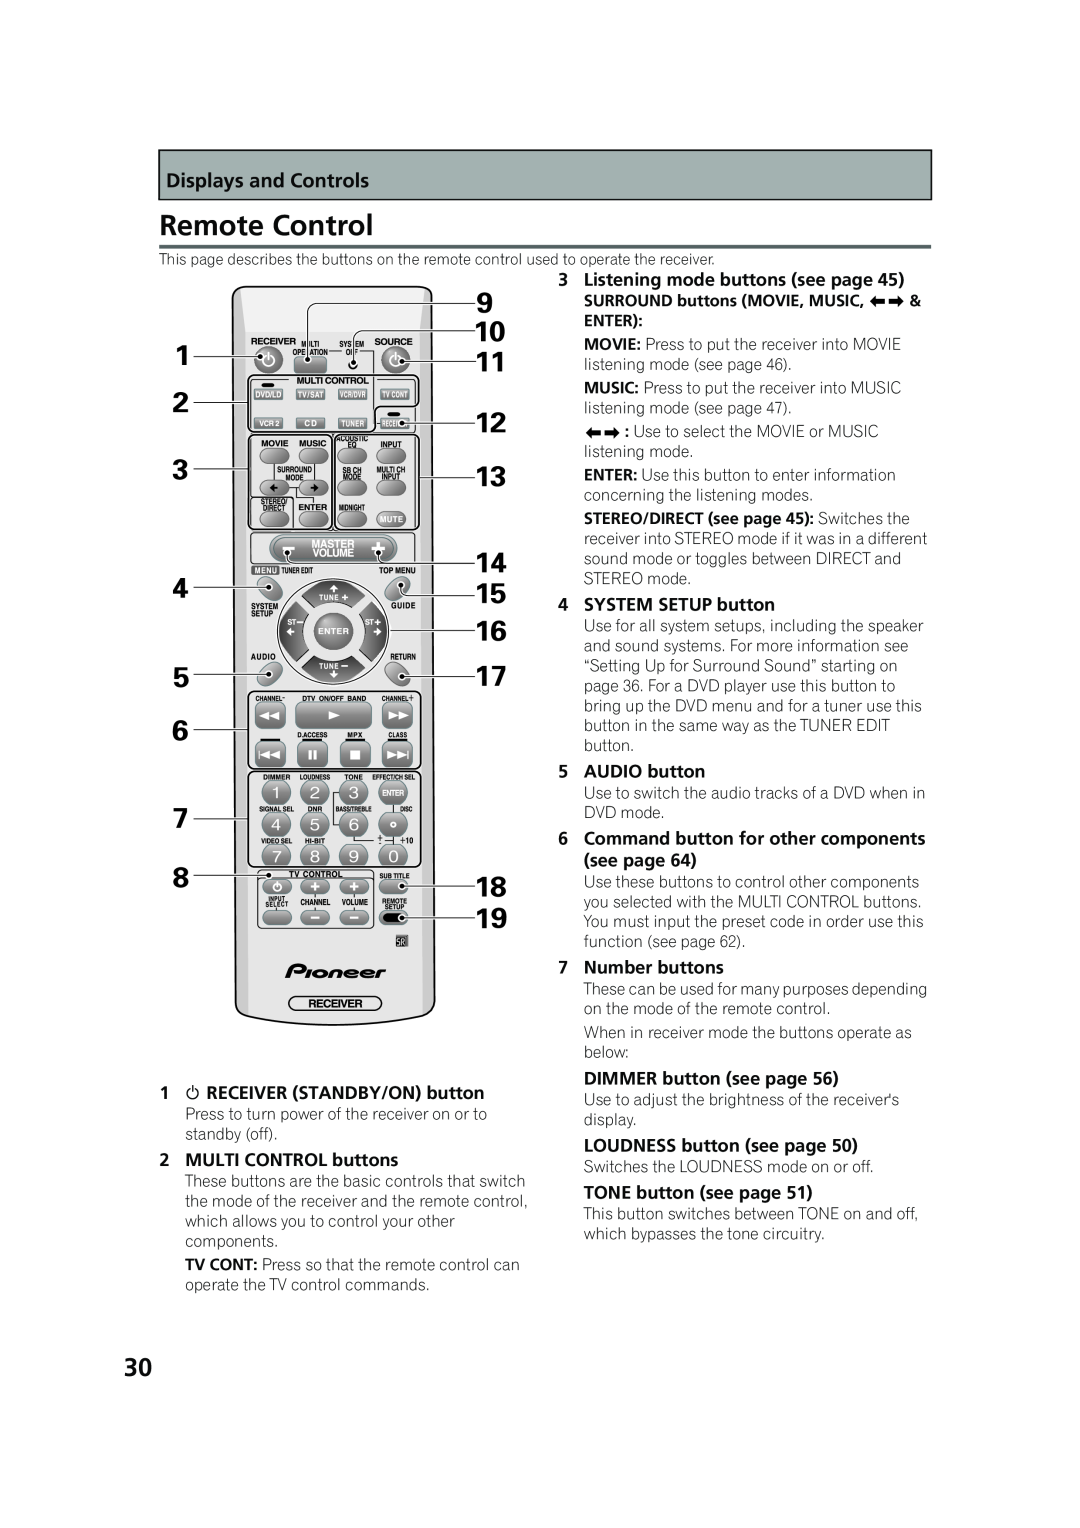 Pioneer VSX-53TX Remote Control, Displays and Controls, Listening mode buttons see page, SYSTEM SETUP button, AUDIO button 